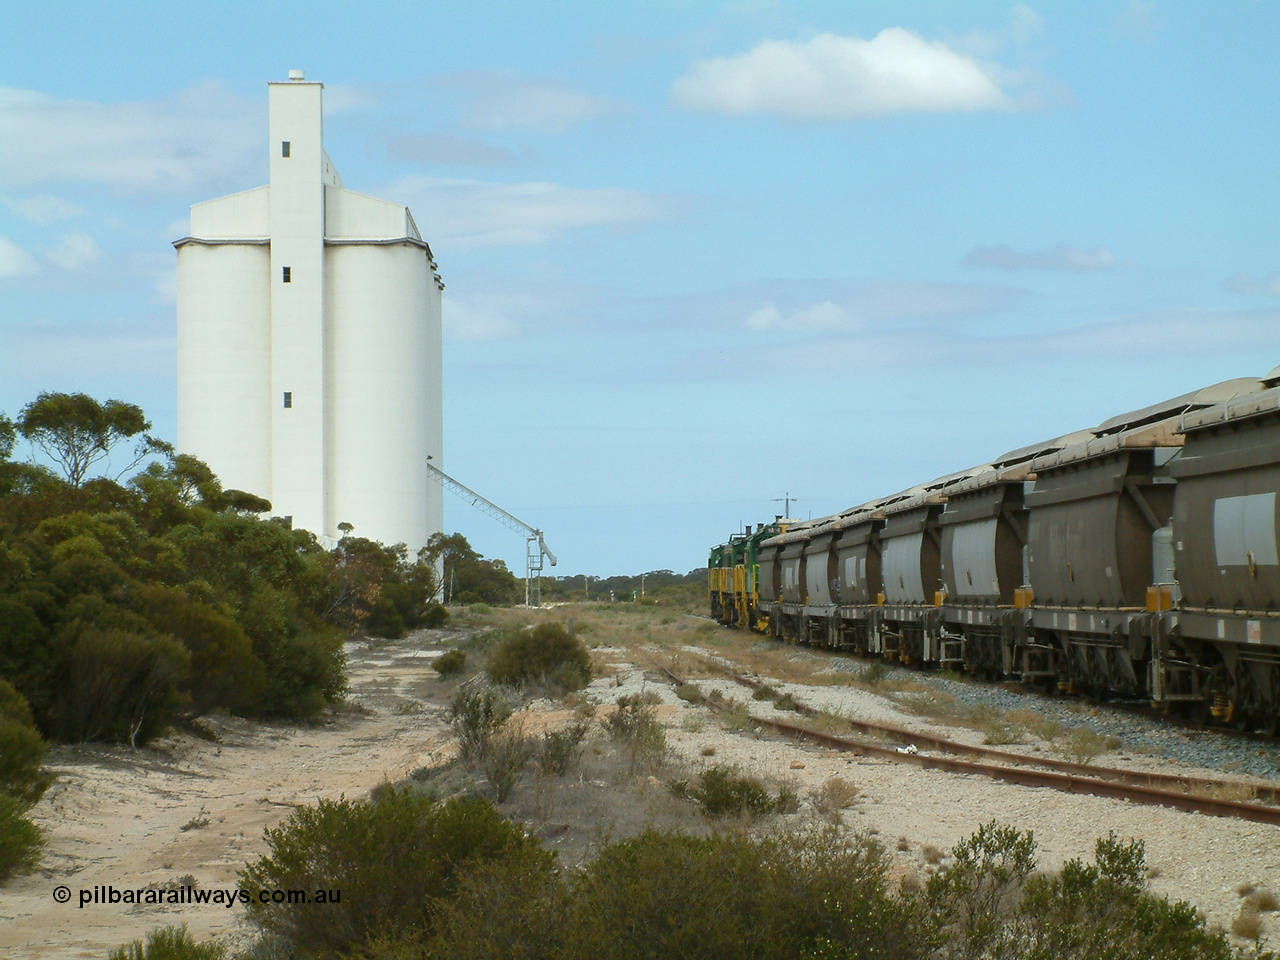 030409 122808
Kielpa, loaded grain train with 830 class unit 851 AE Goodwin ALCo model DL531 serial 84137, 851 has spent its entire operating career on the Eyre Peninsula, leads fellow 830 class 842 serial 84140 and a rebuilt unit DA 4 rumbles over the north end points heading south.
